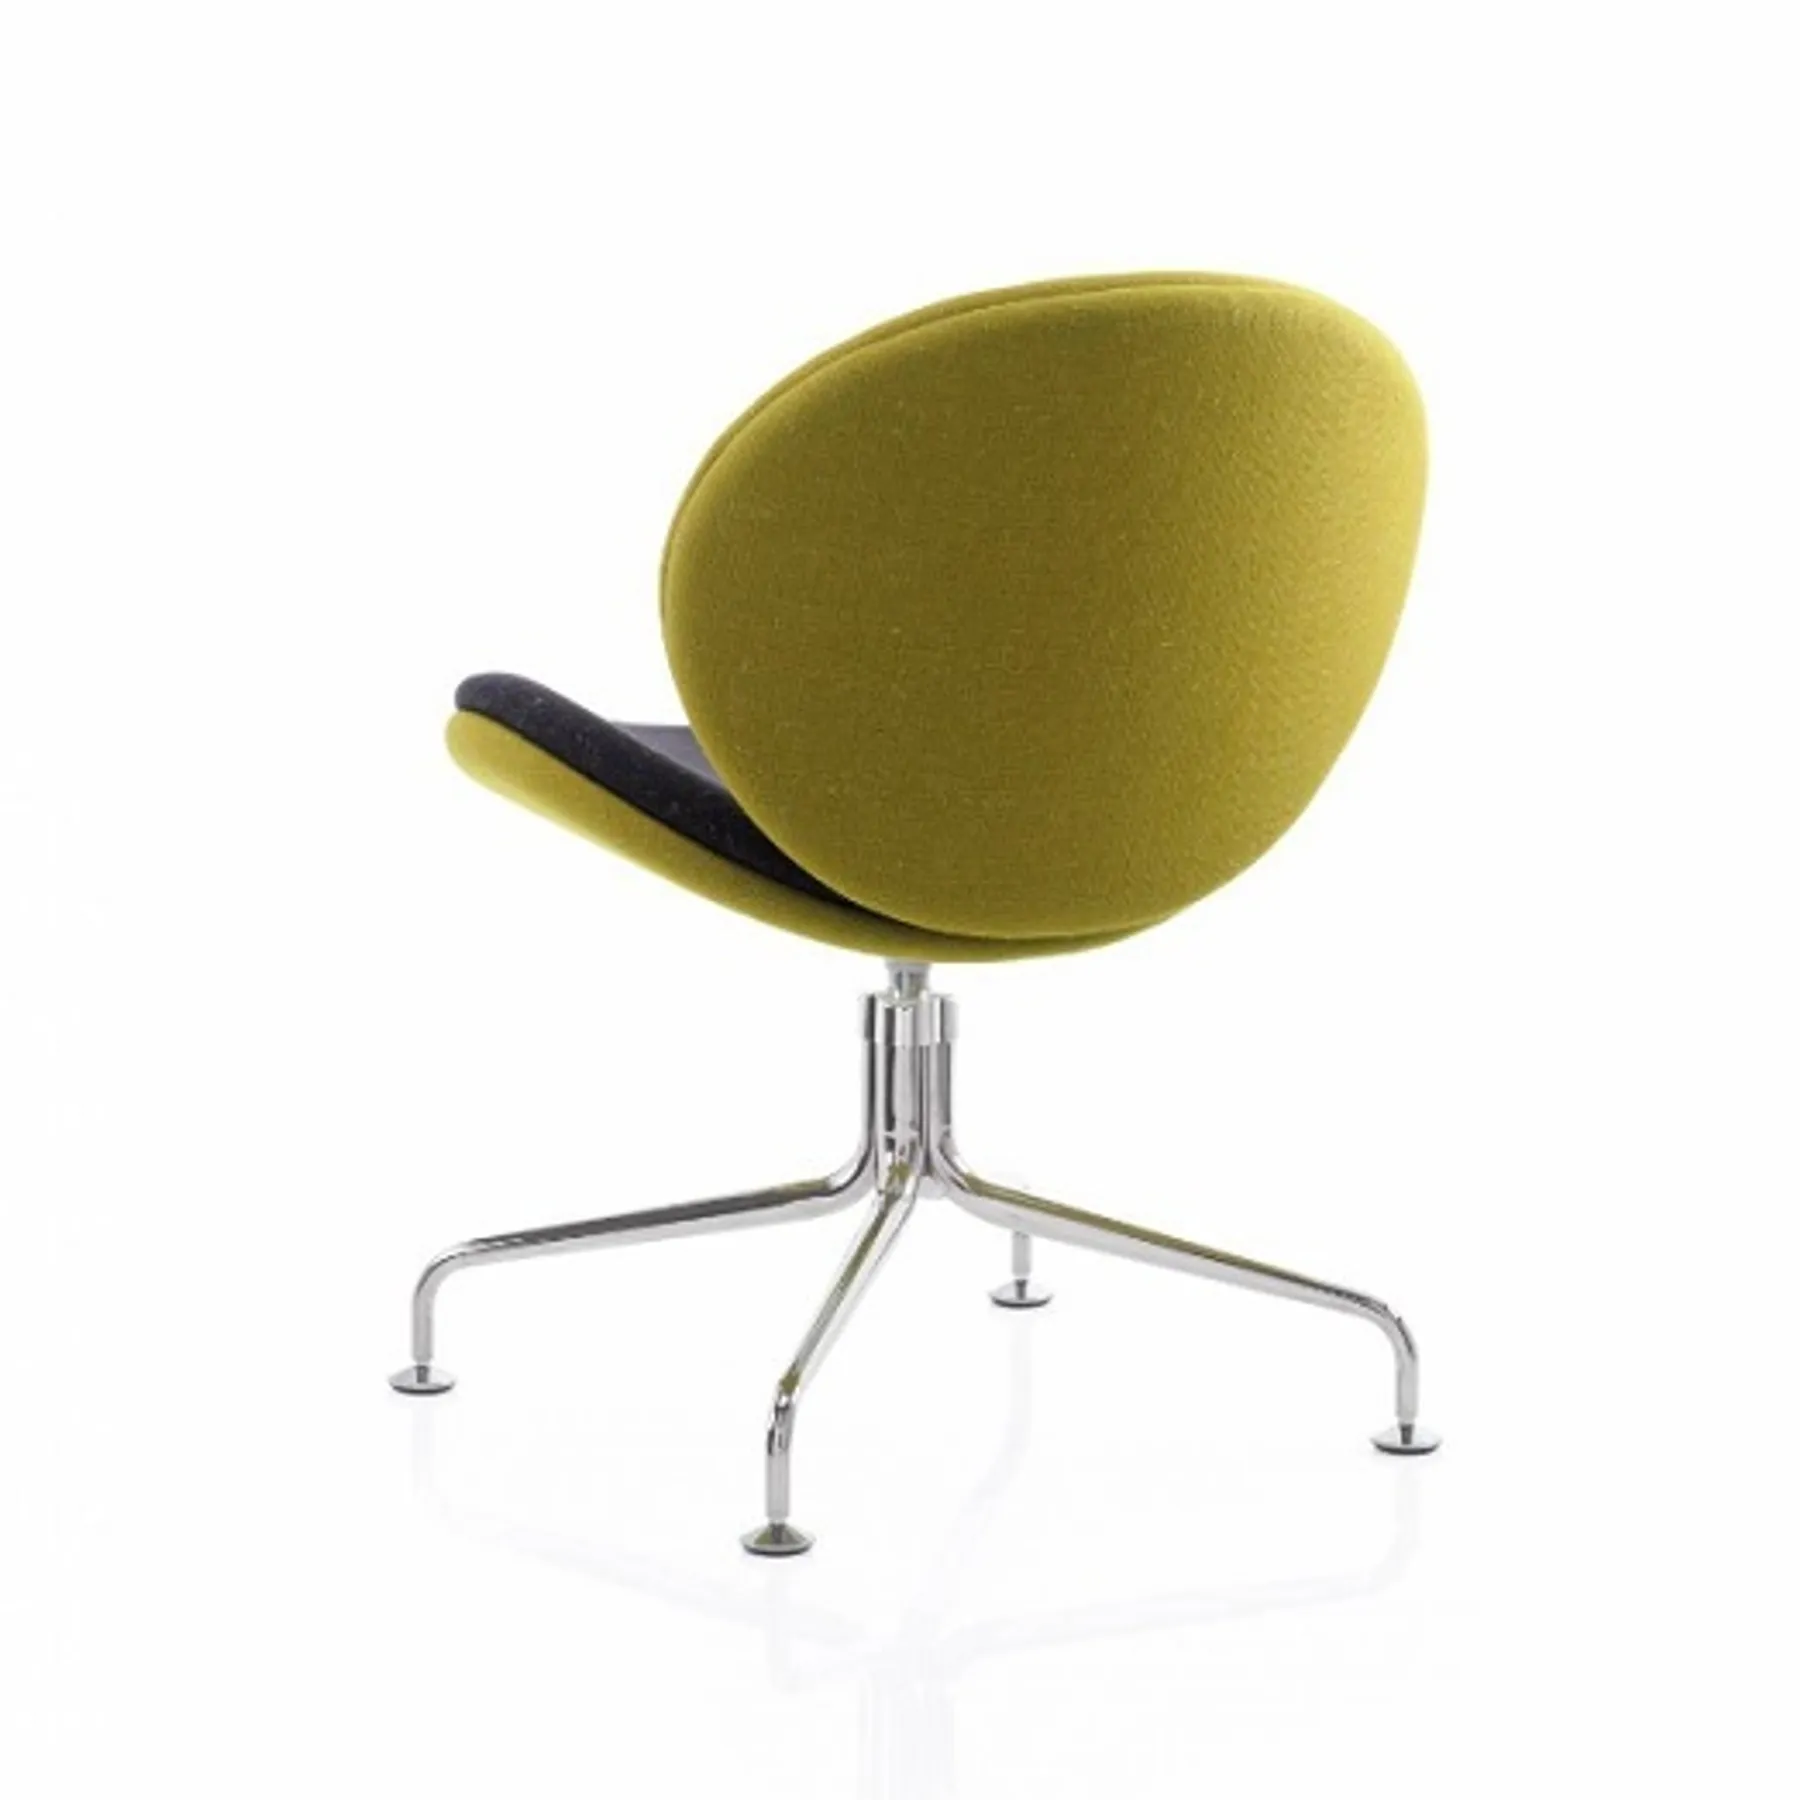 Lof Direct Giggle Chair ocee design giggle3 rear